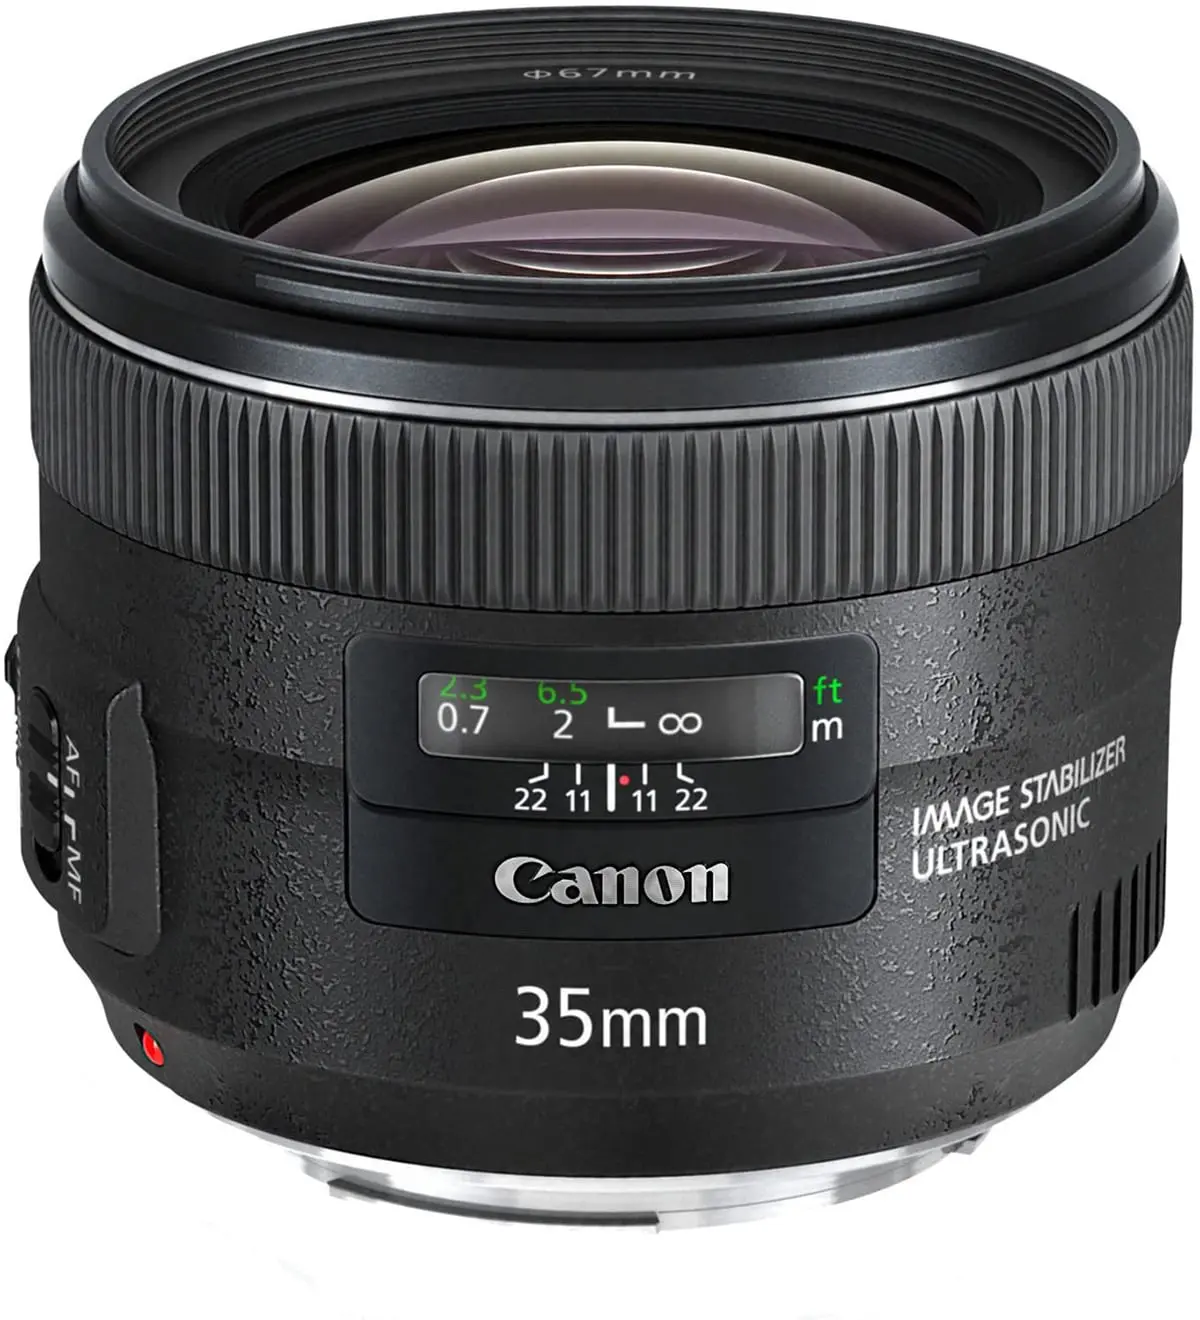 Canon EF 35mm f2 IS USM Wide Angle Lens